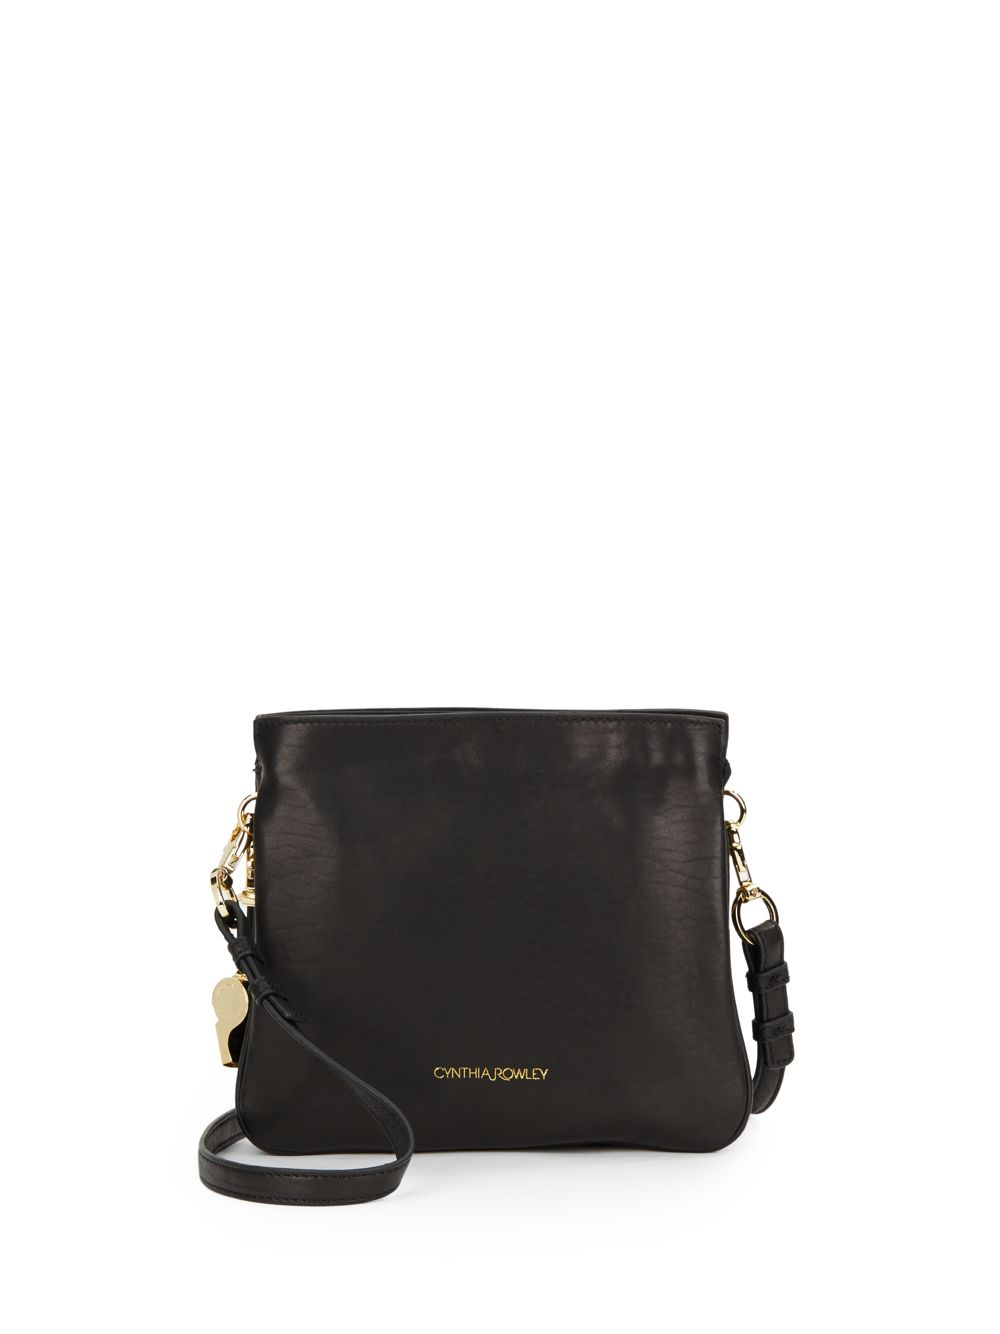 cynthia rowley black nixie leather shoulder bag product 1 268649456 normal